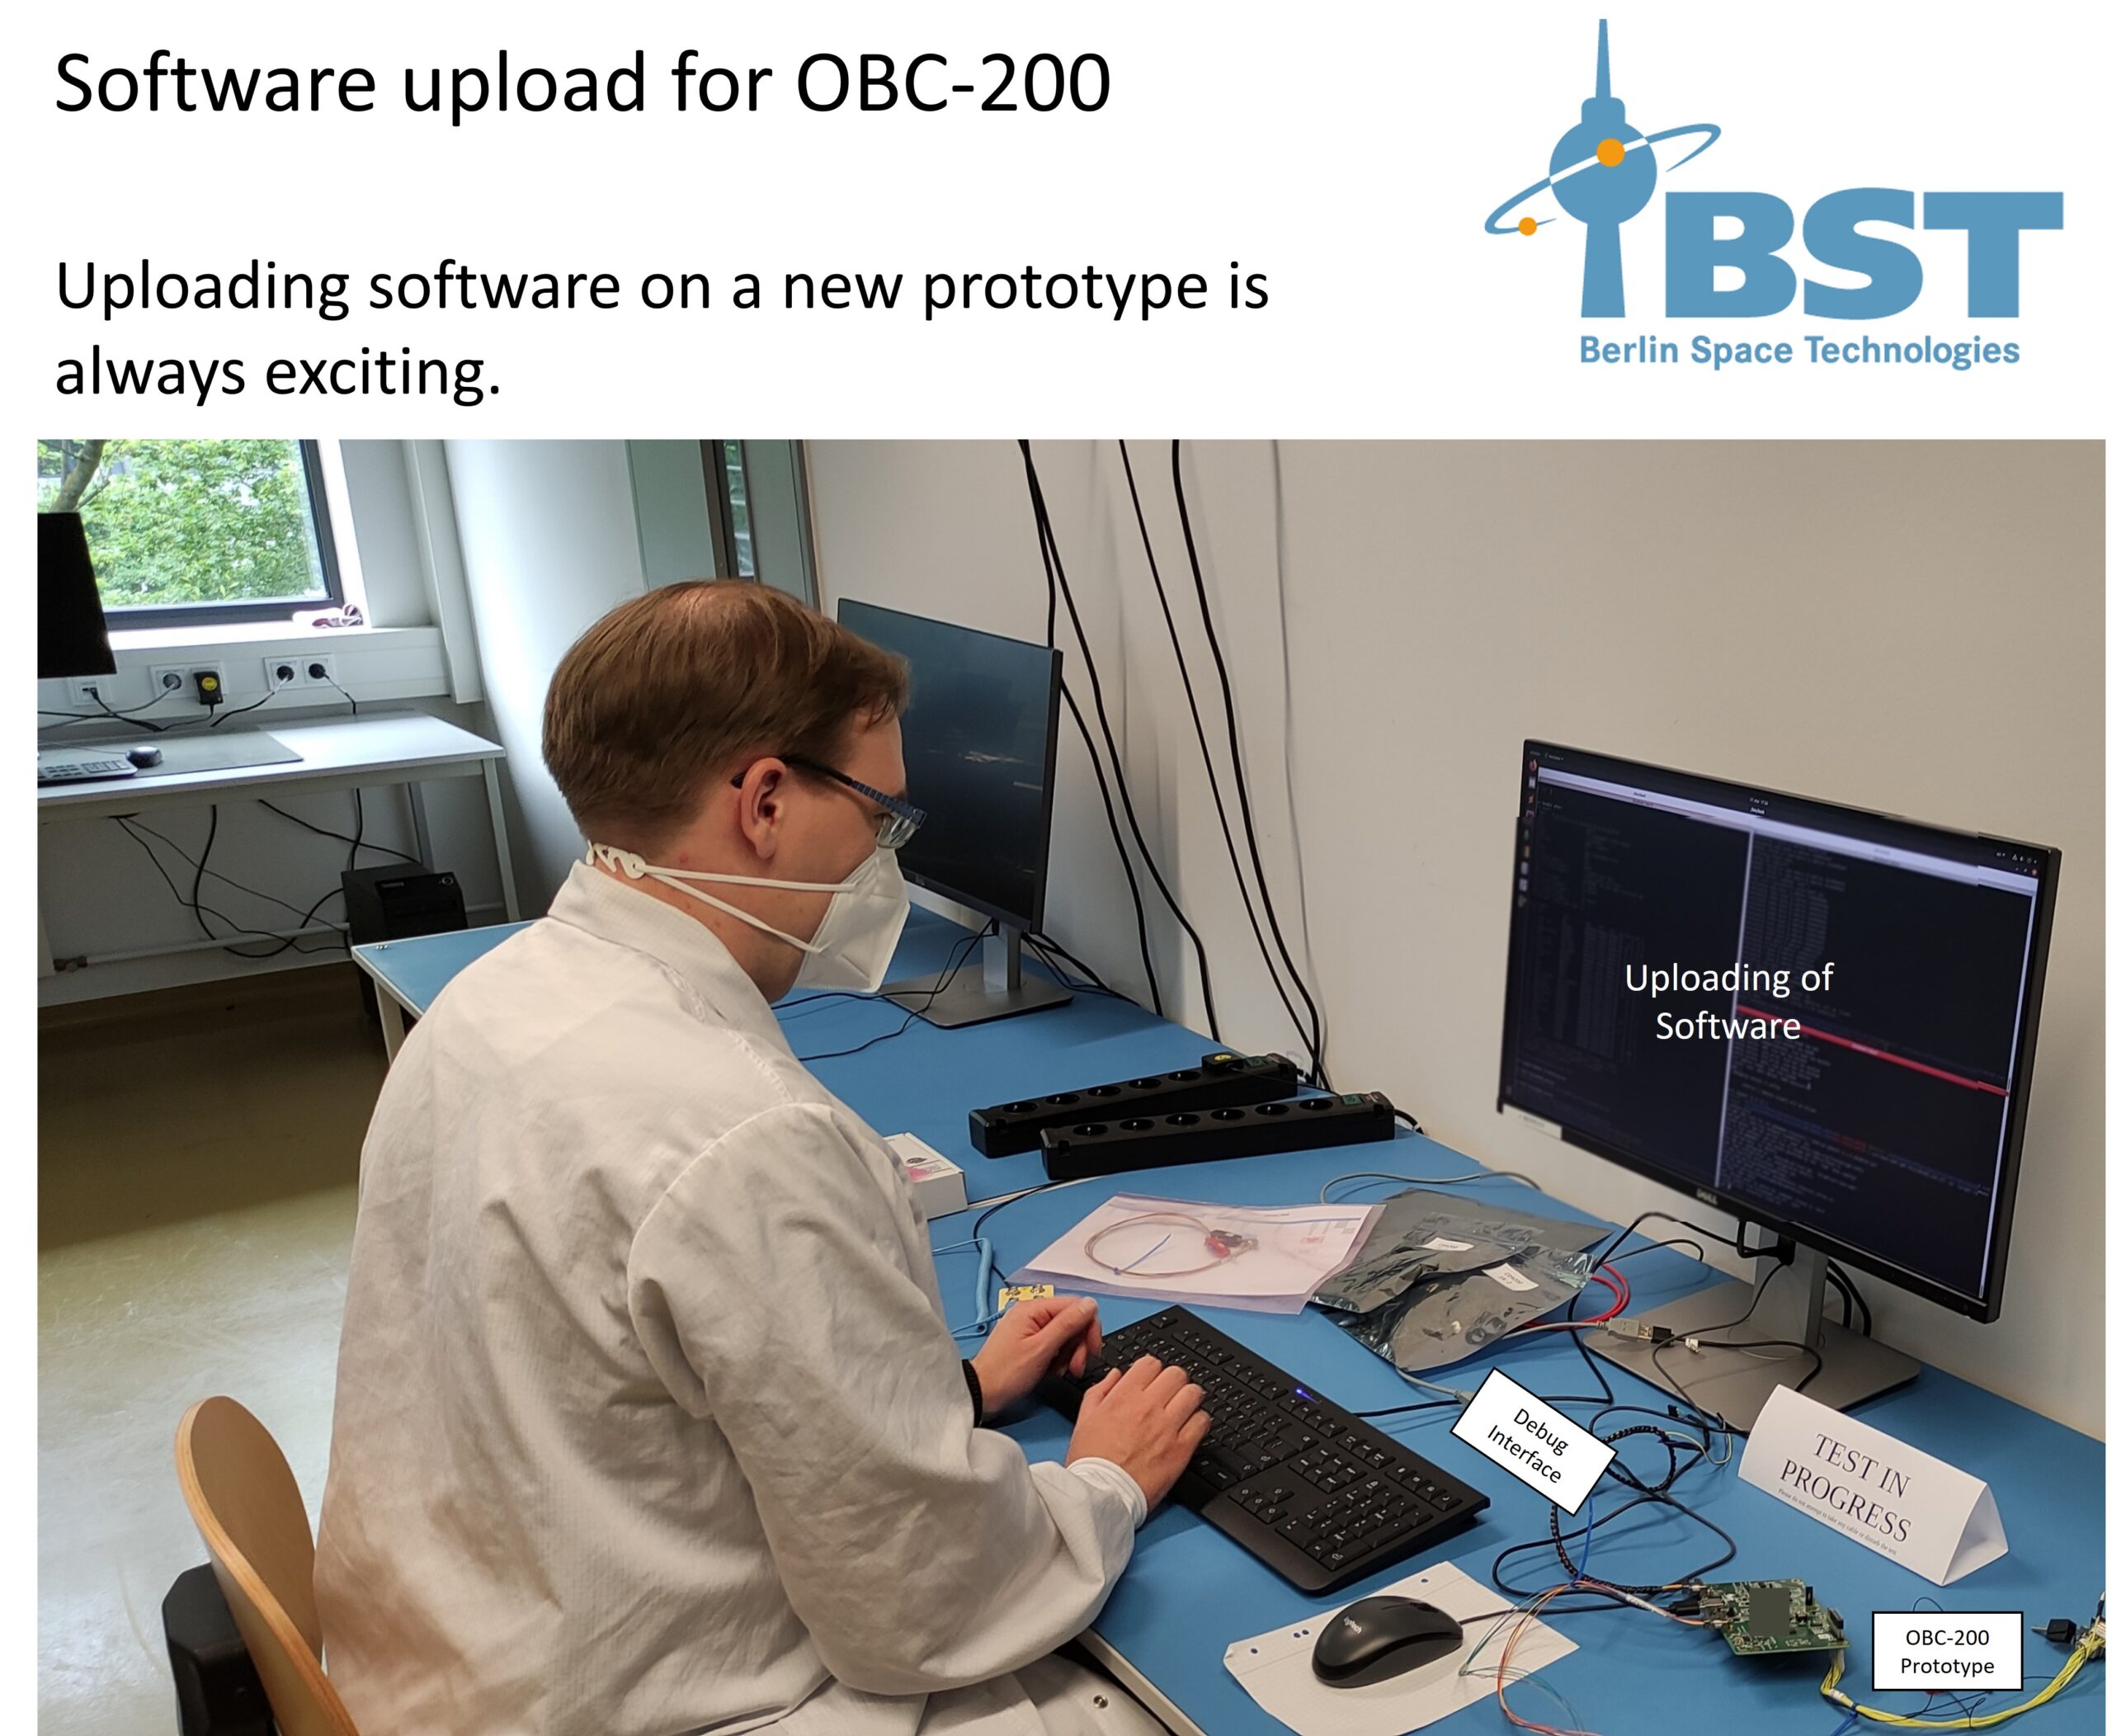 Software upload for OBC-200